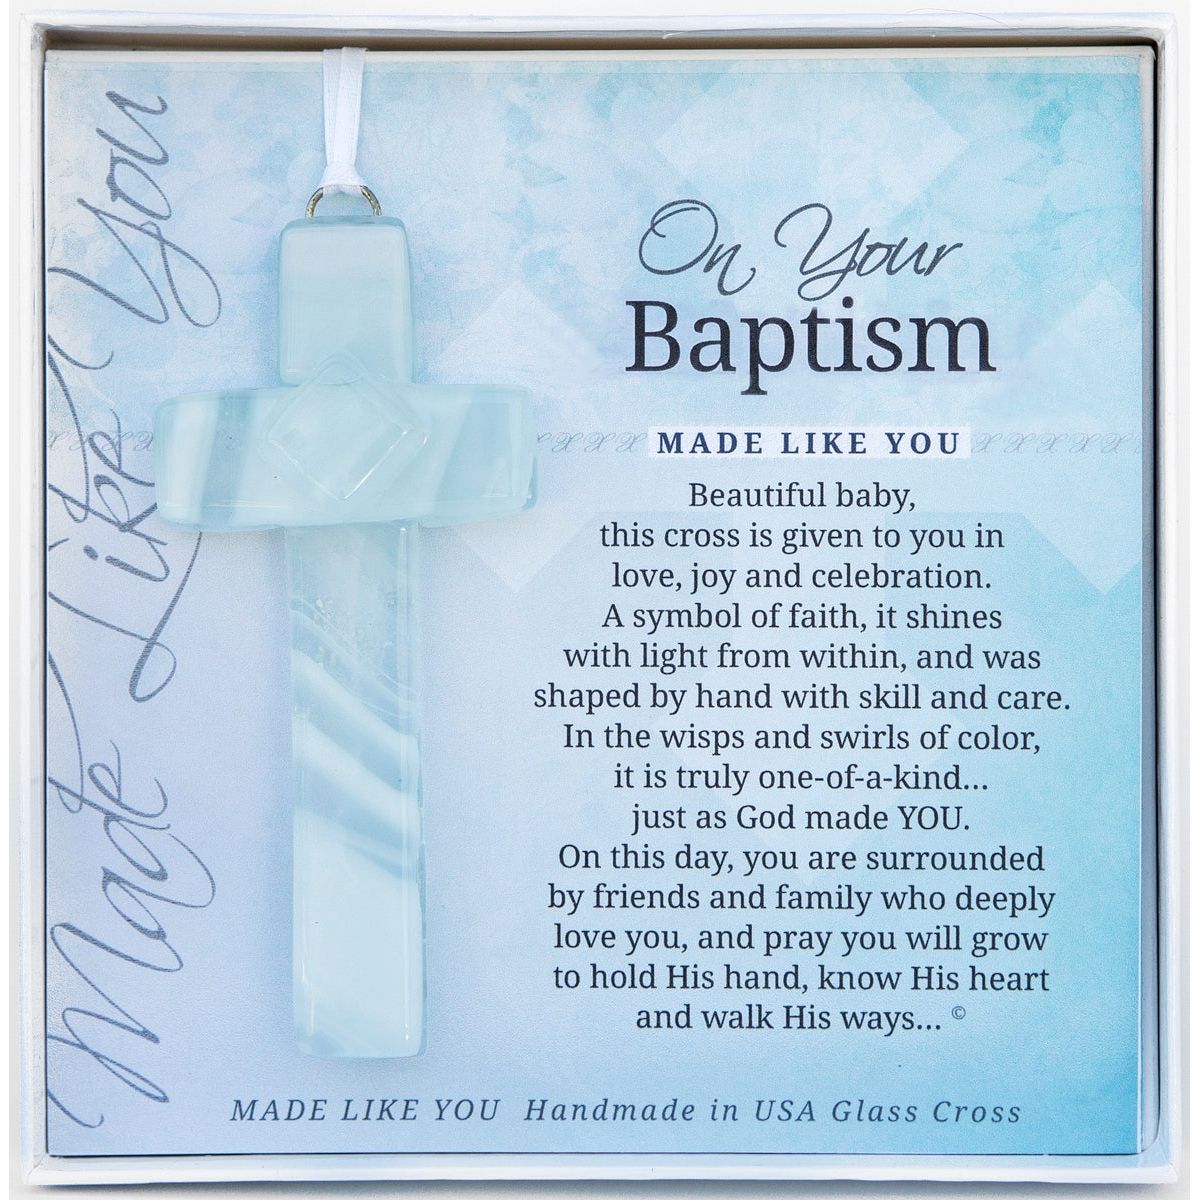 Baptism Gift - Handmade 4" White/Clear glass cross and "On Your Baptism" sentiment in white box with clear lid.